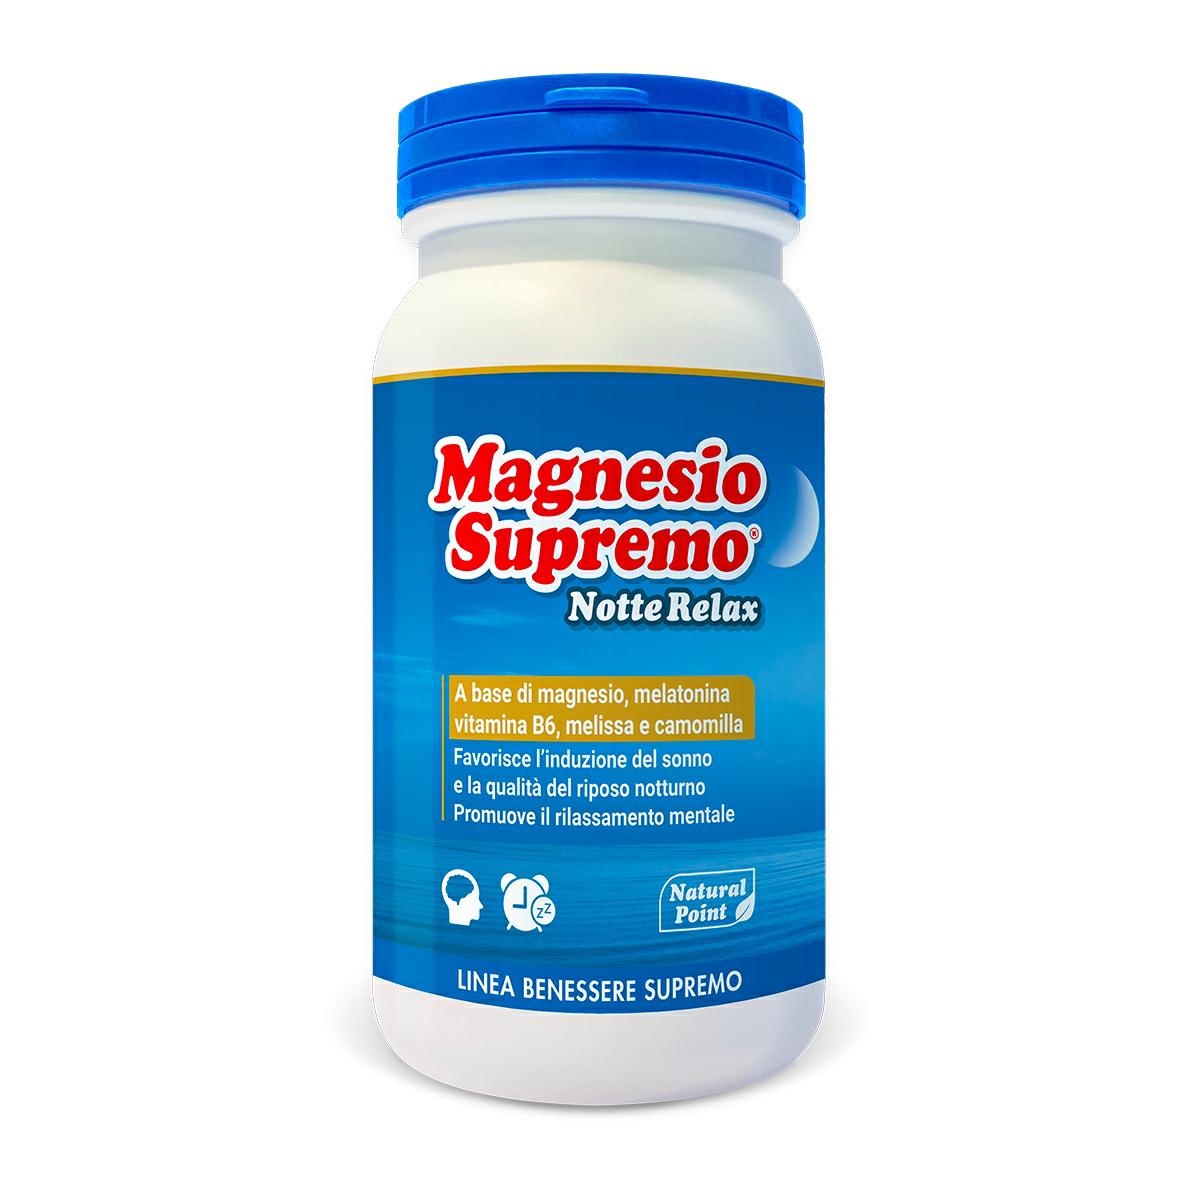 MAGNESIO SUPREMO NOTTE RELAX 150 GR NATURAL POINT